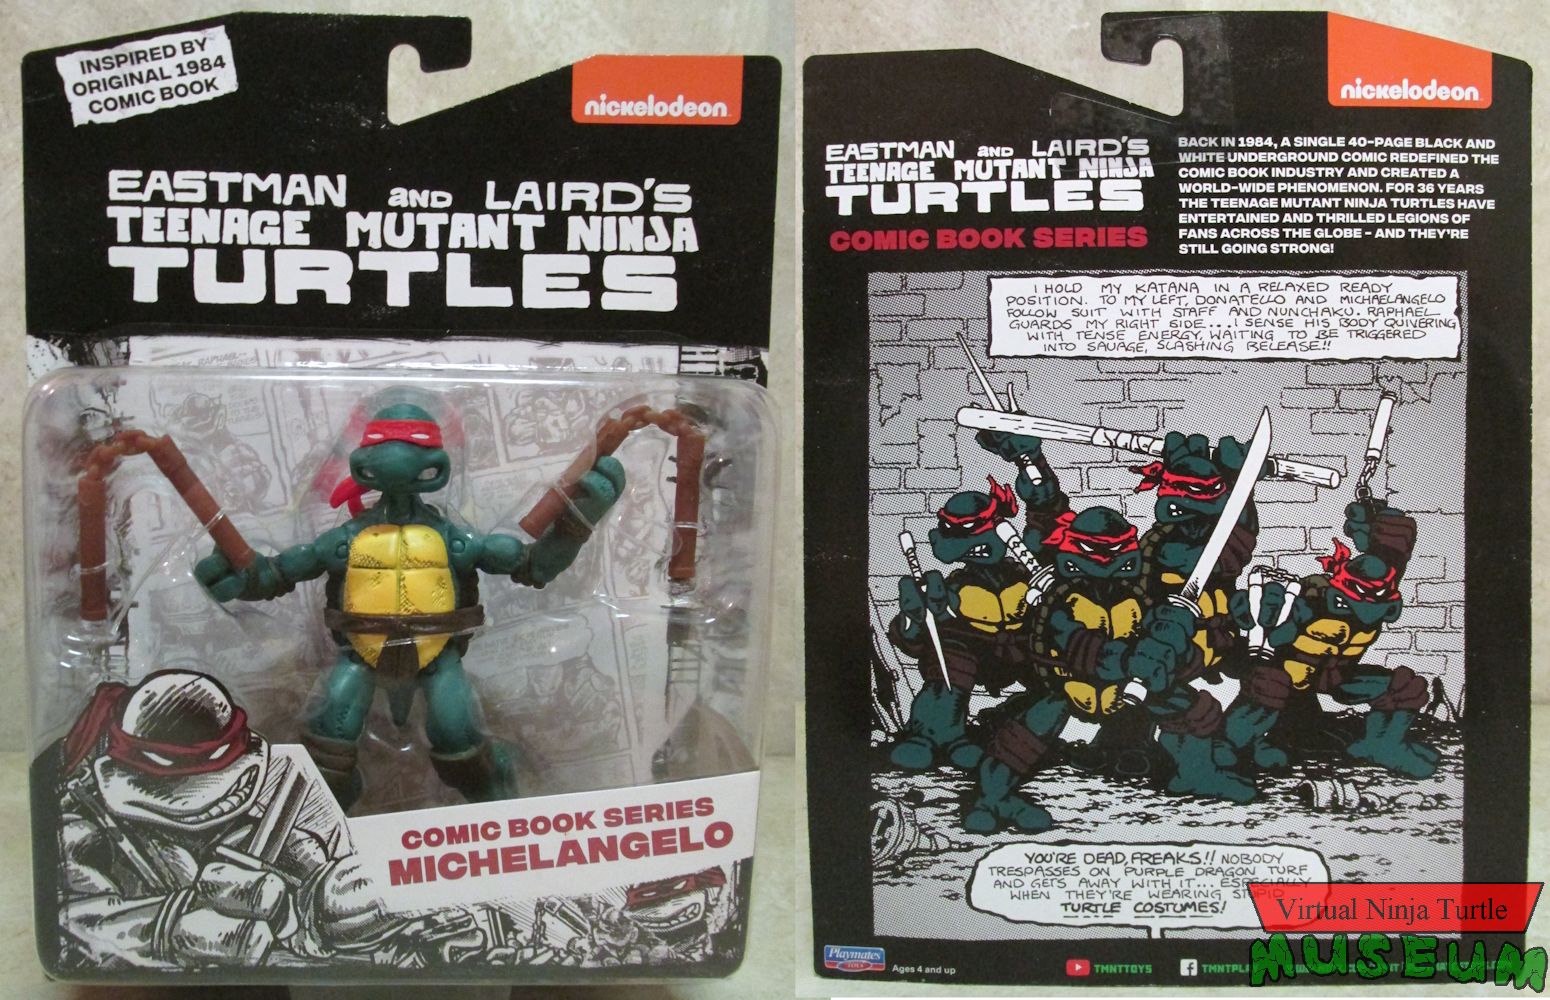 Comic Book Series Michelangelo MOC front and back